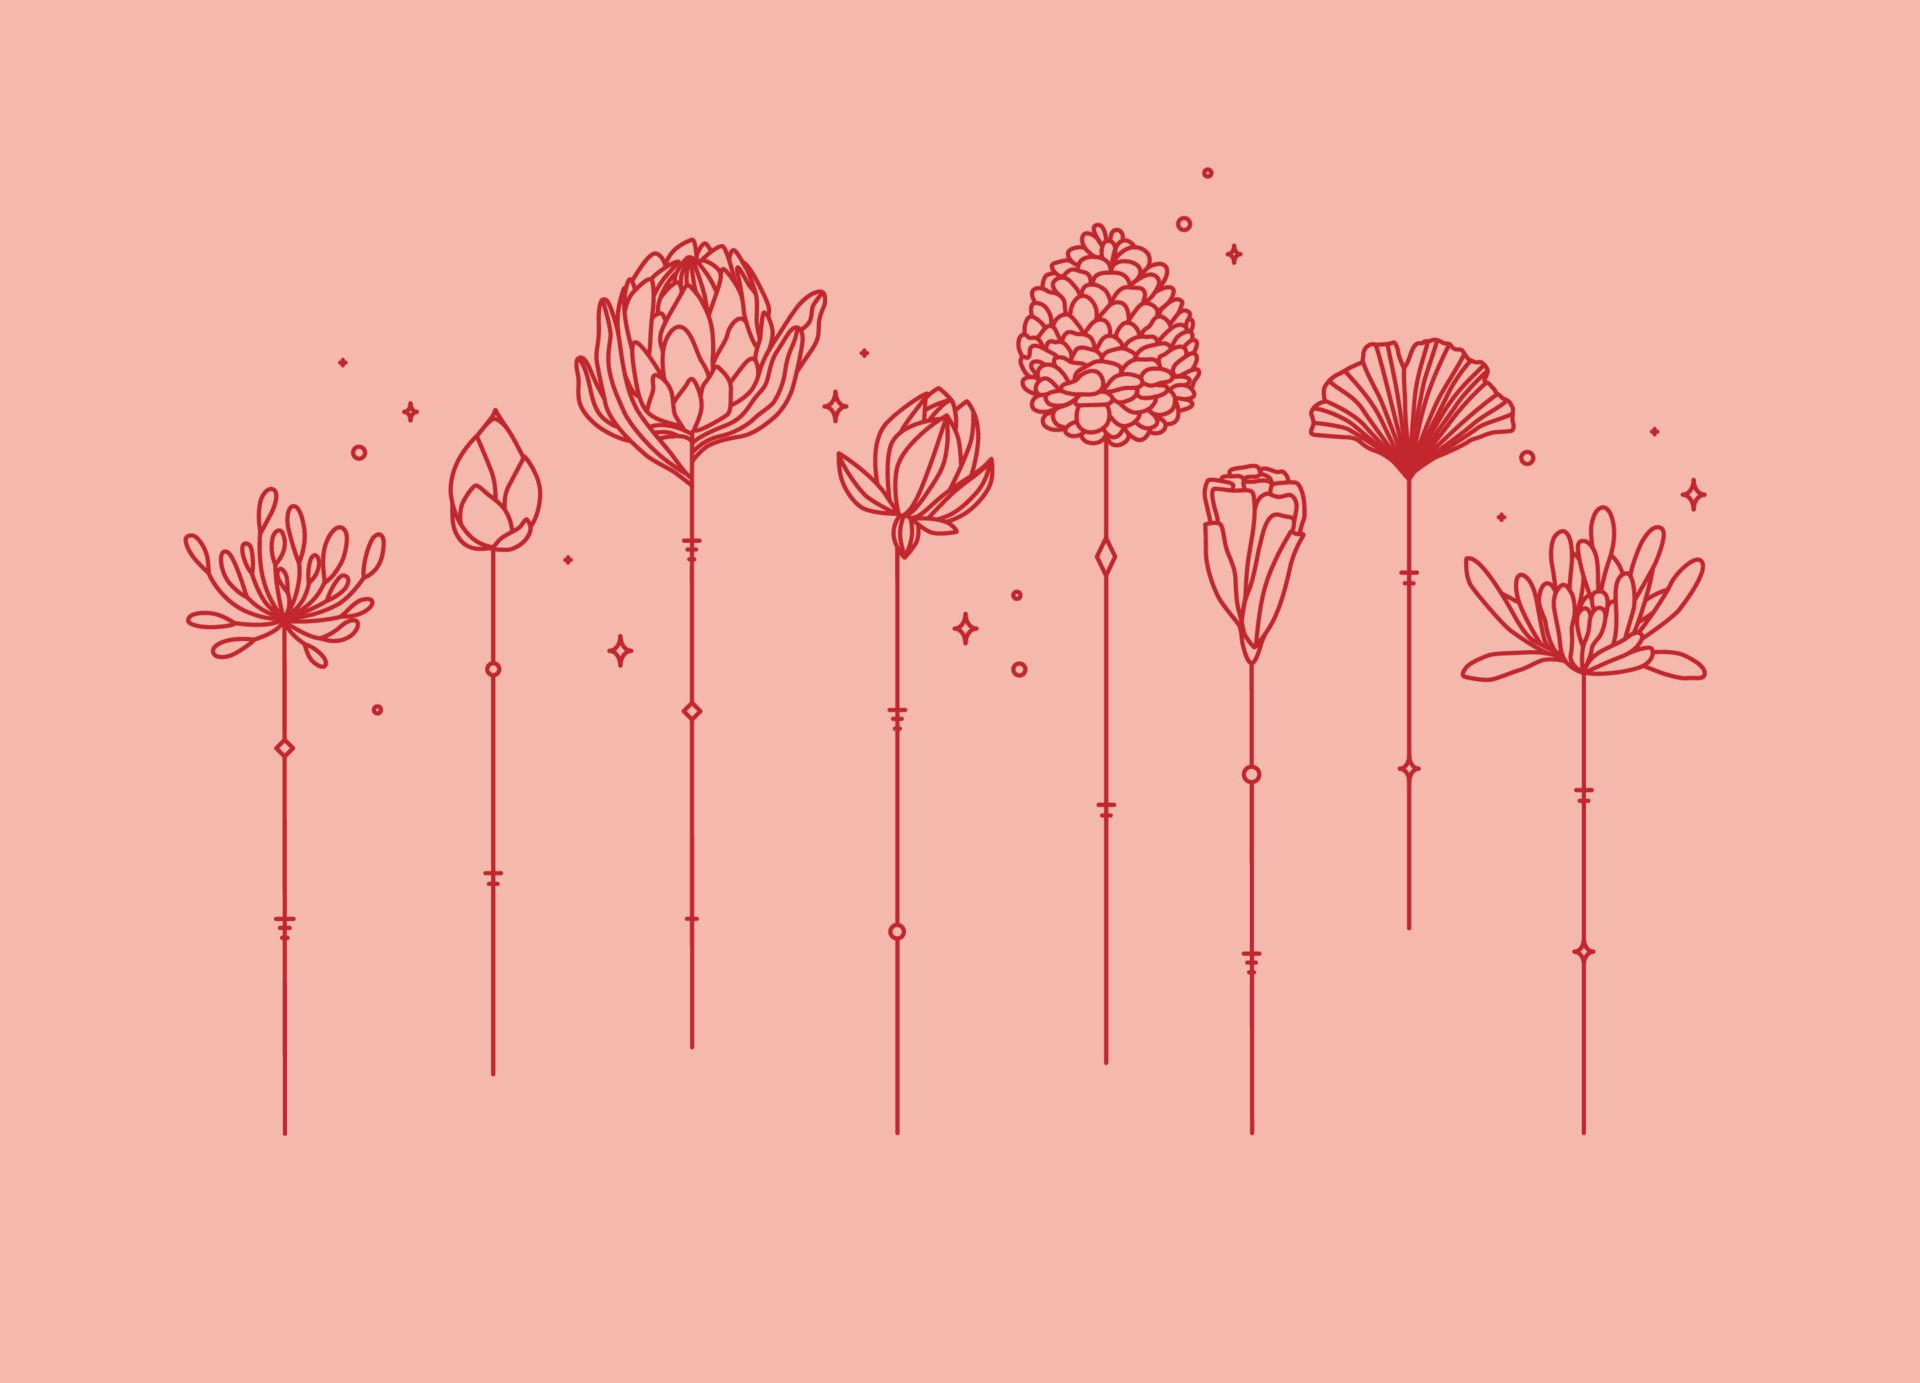 Flowers long stem drawing in art deco style on coral background